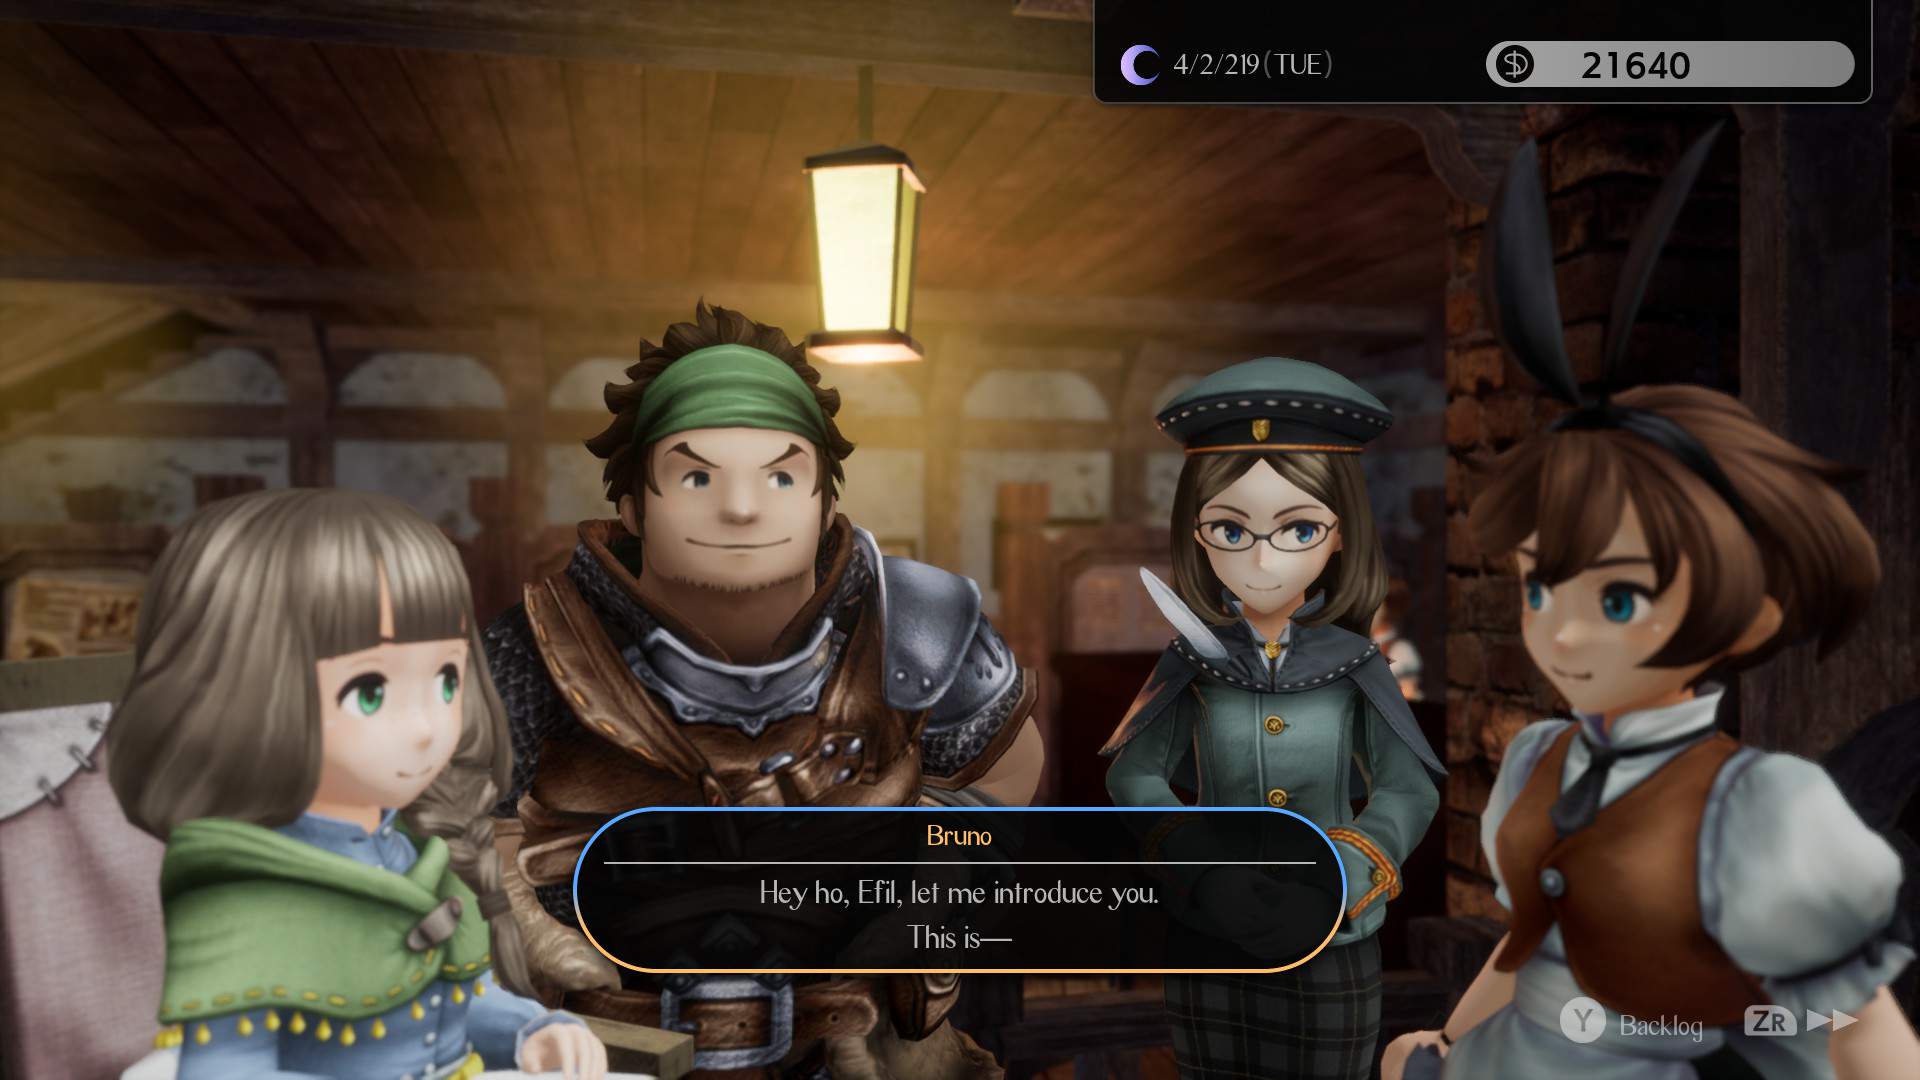 Gameplay screenshot showing 4 of the playable characters with a dialogue box